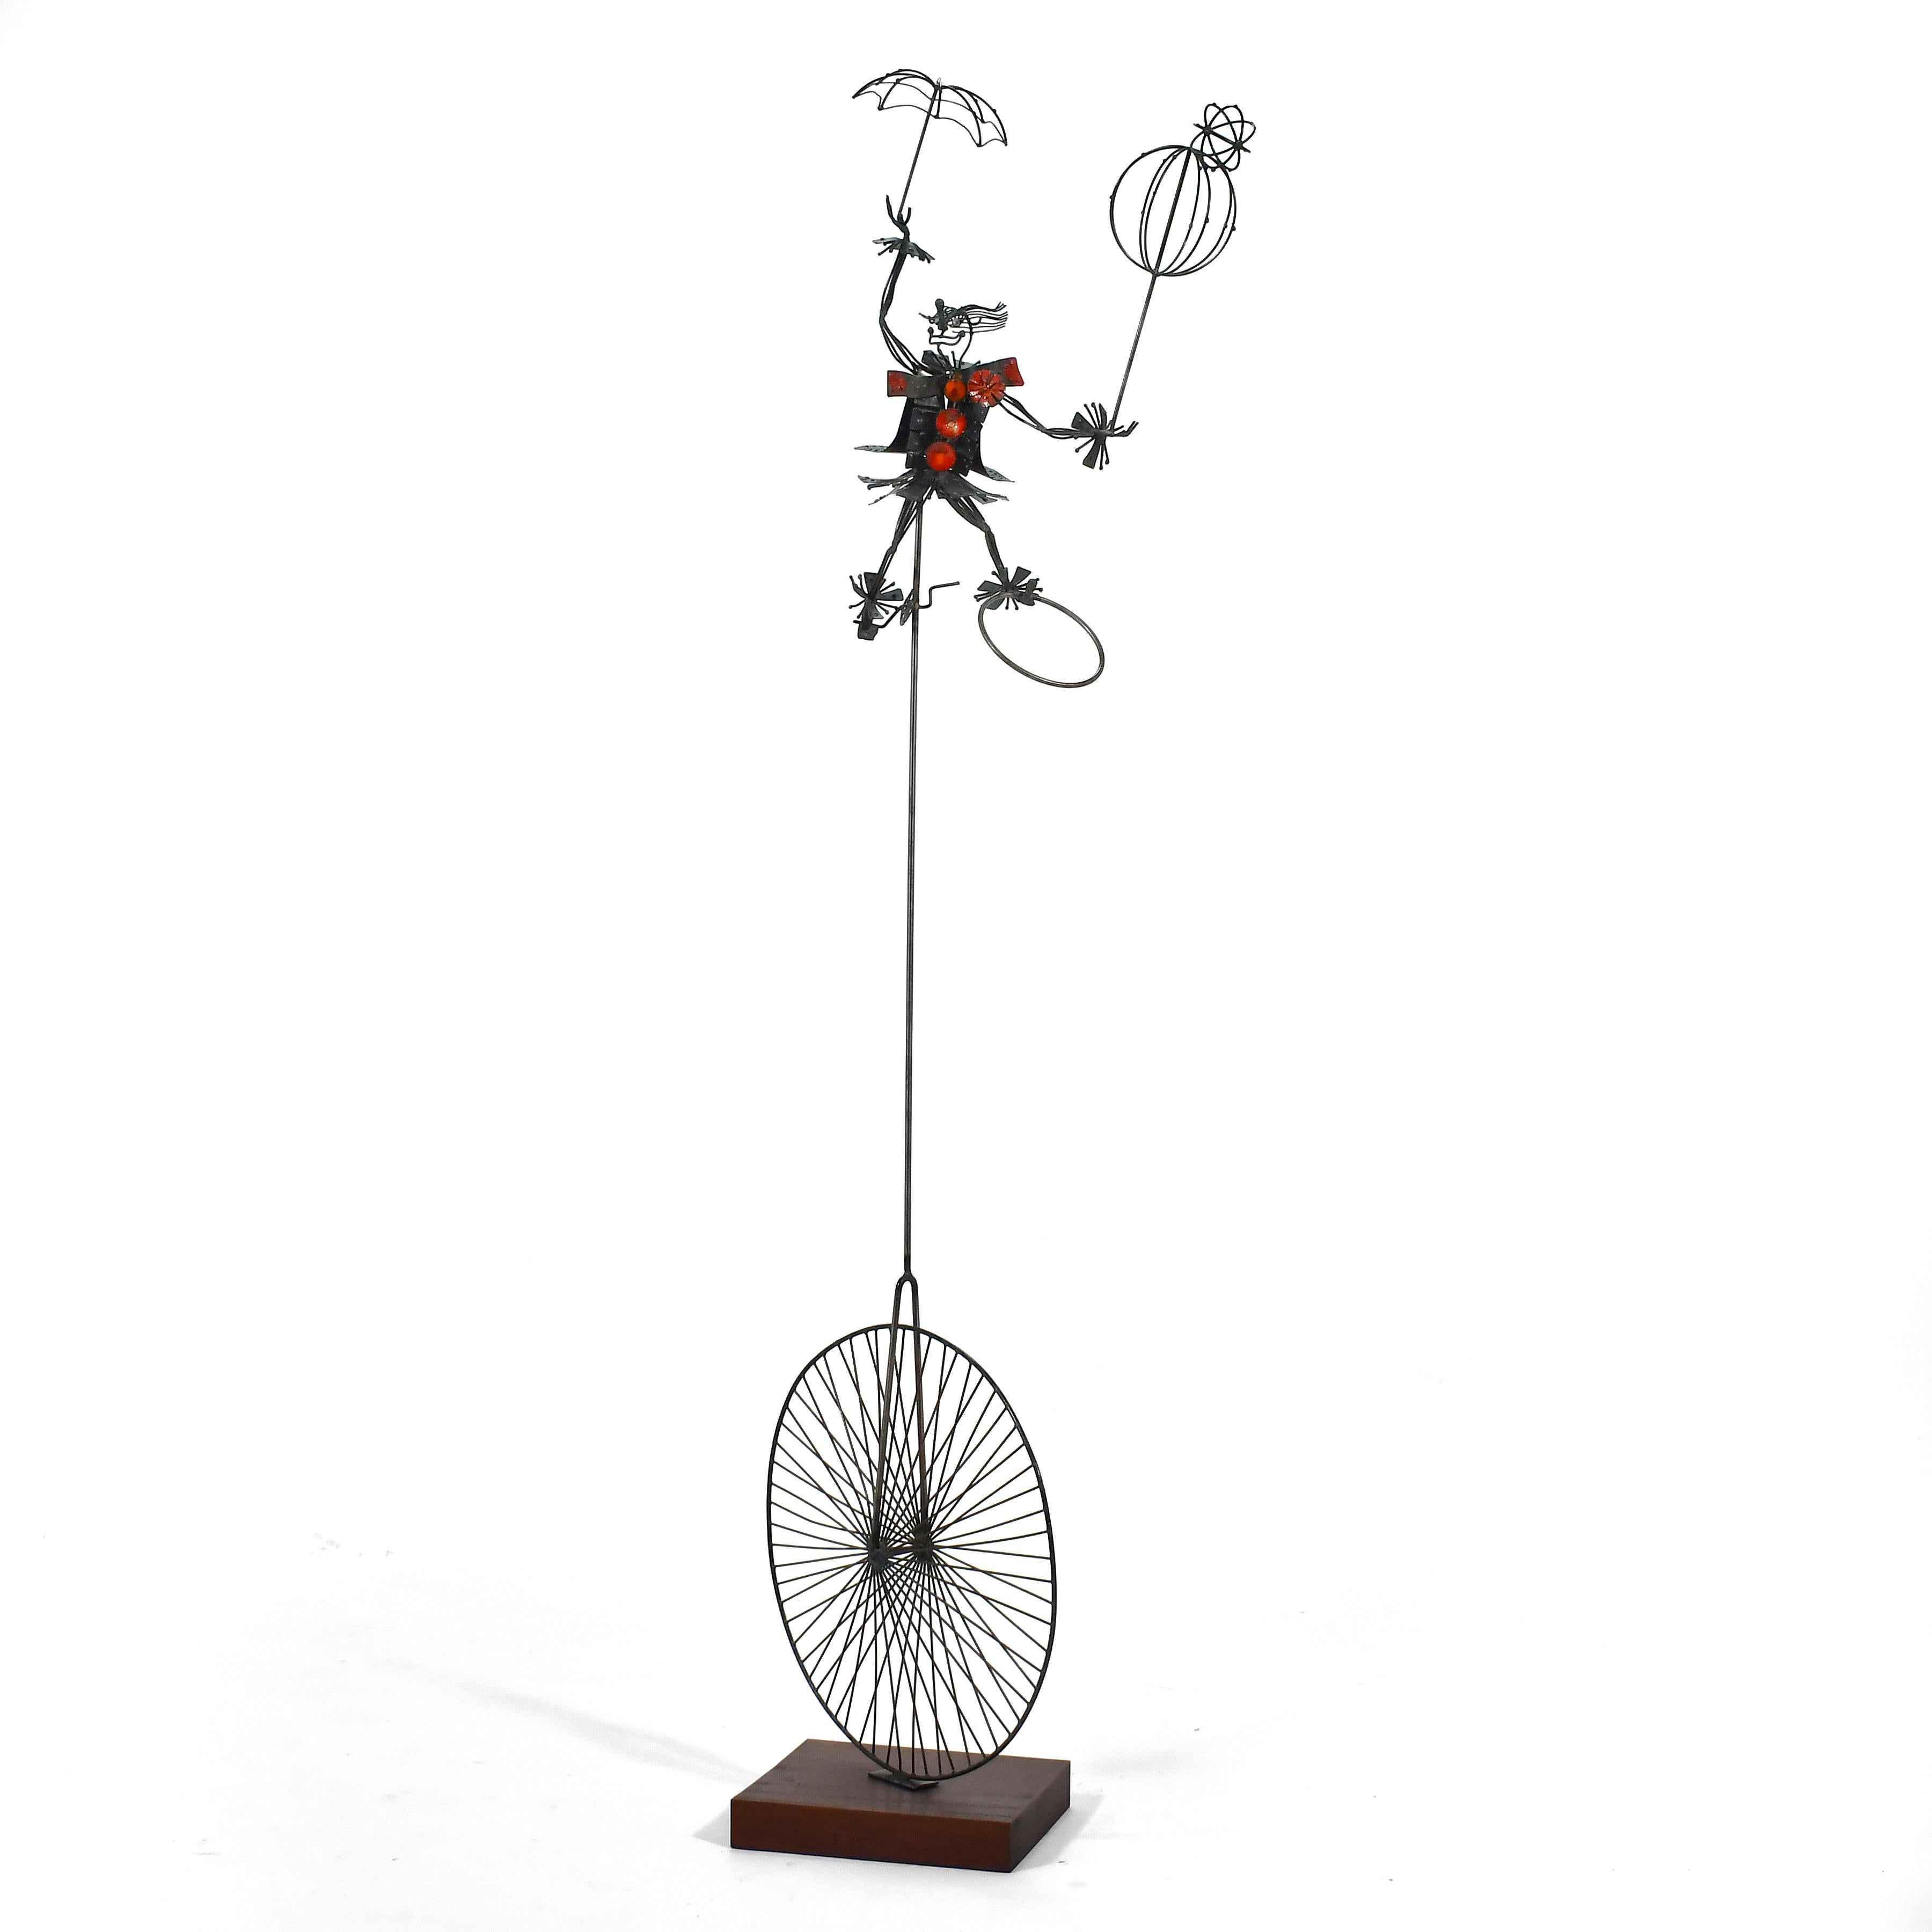 This delightful piece by Joseph A. Burlini (b. 1937) made of welded and enameled bronze features a whimsical clown perched high atop a unicycle with colorful enamel highlights. The linear quality of the textured rods give it the appearance of a